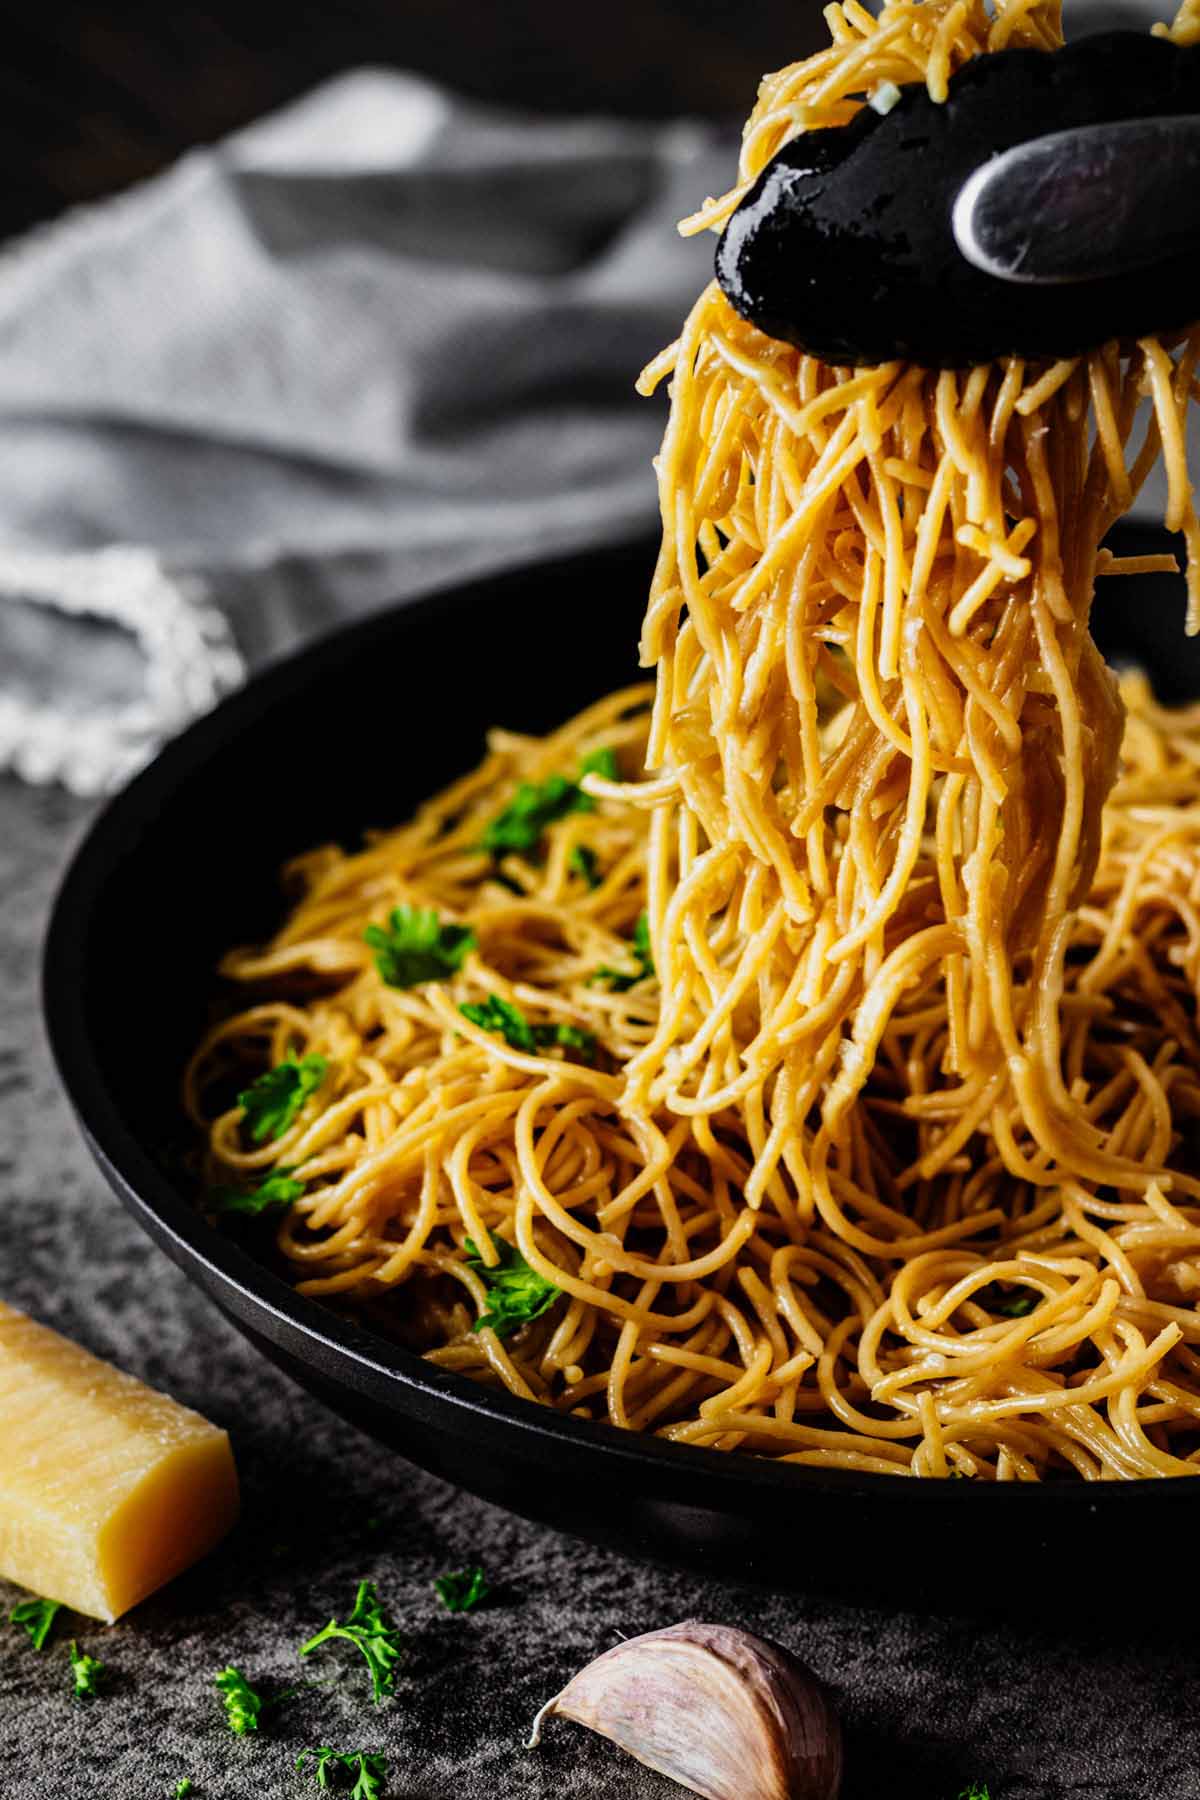 Tongs lifting Parmesan butter noodles from a skillet.